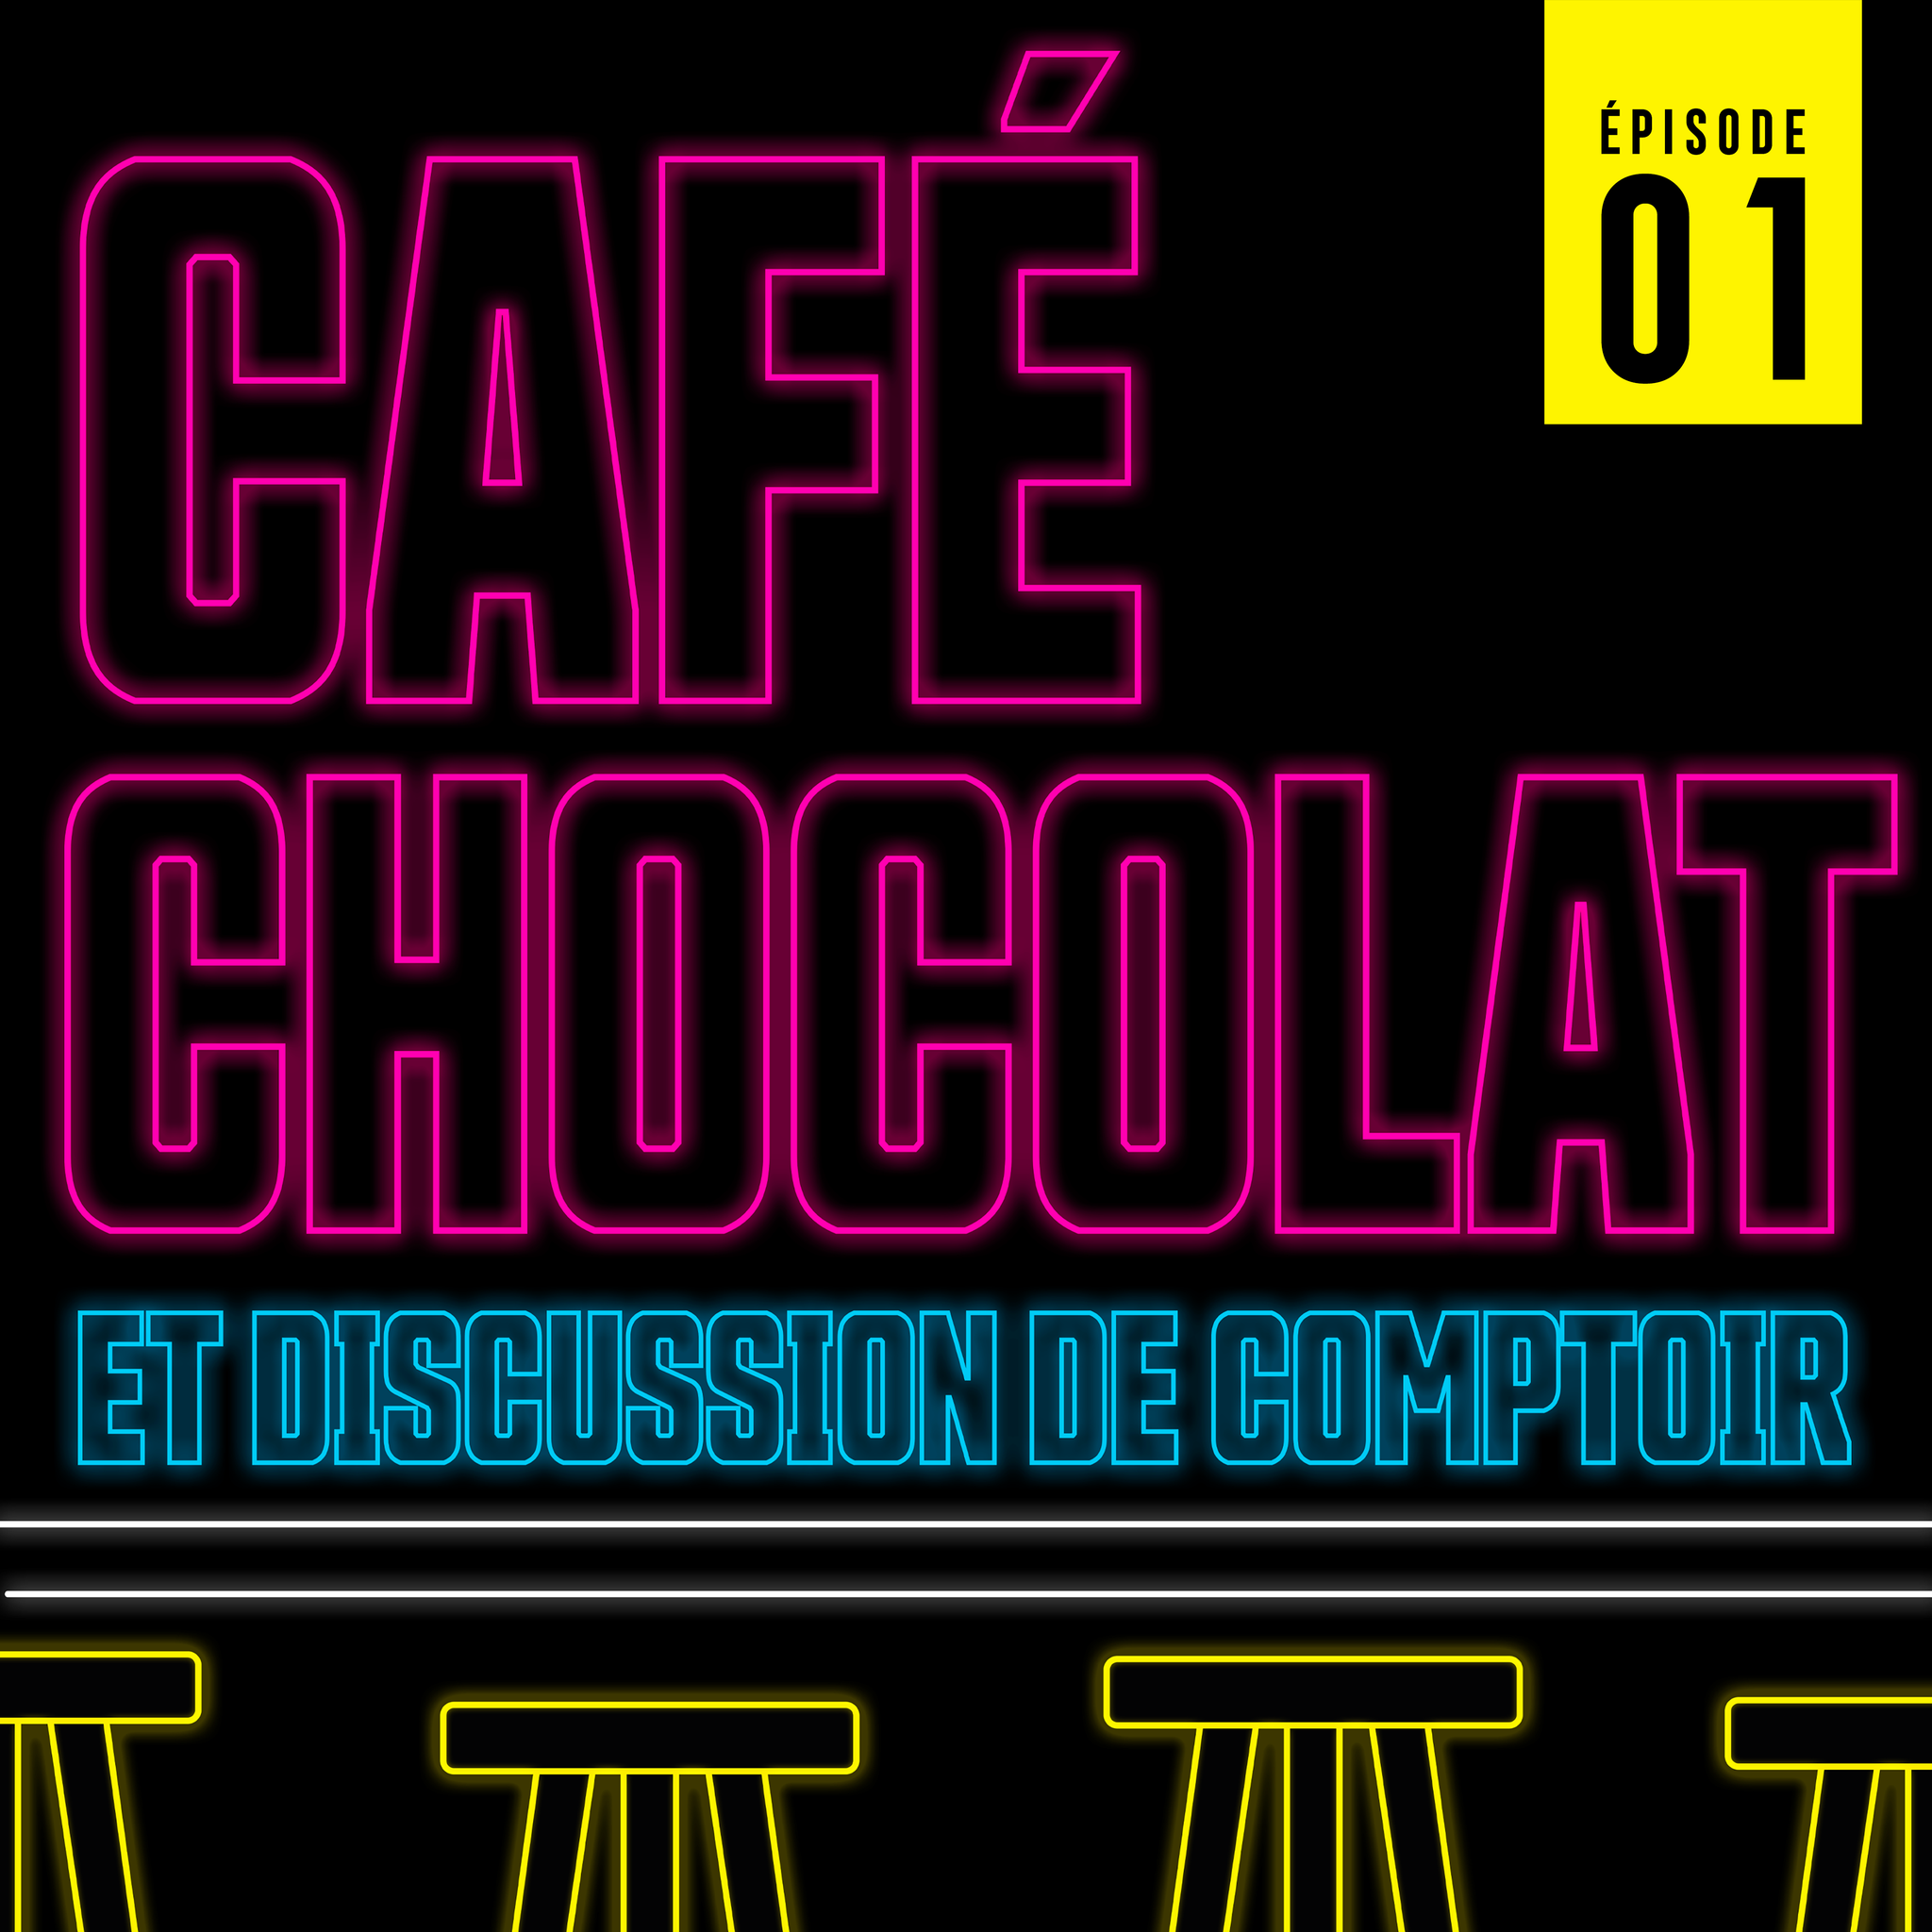 Coffee, Chocolate and counter discussion - Episode 01